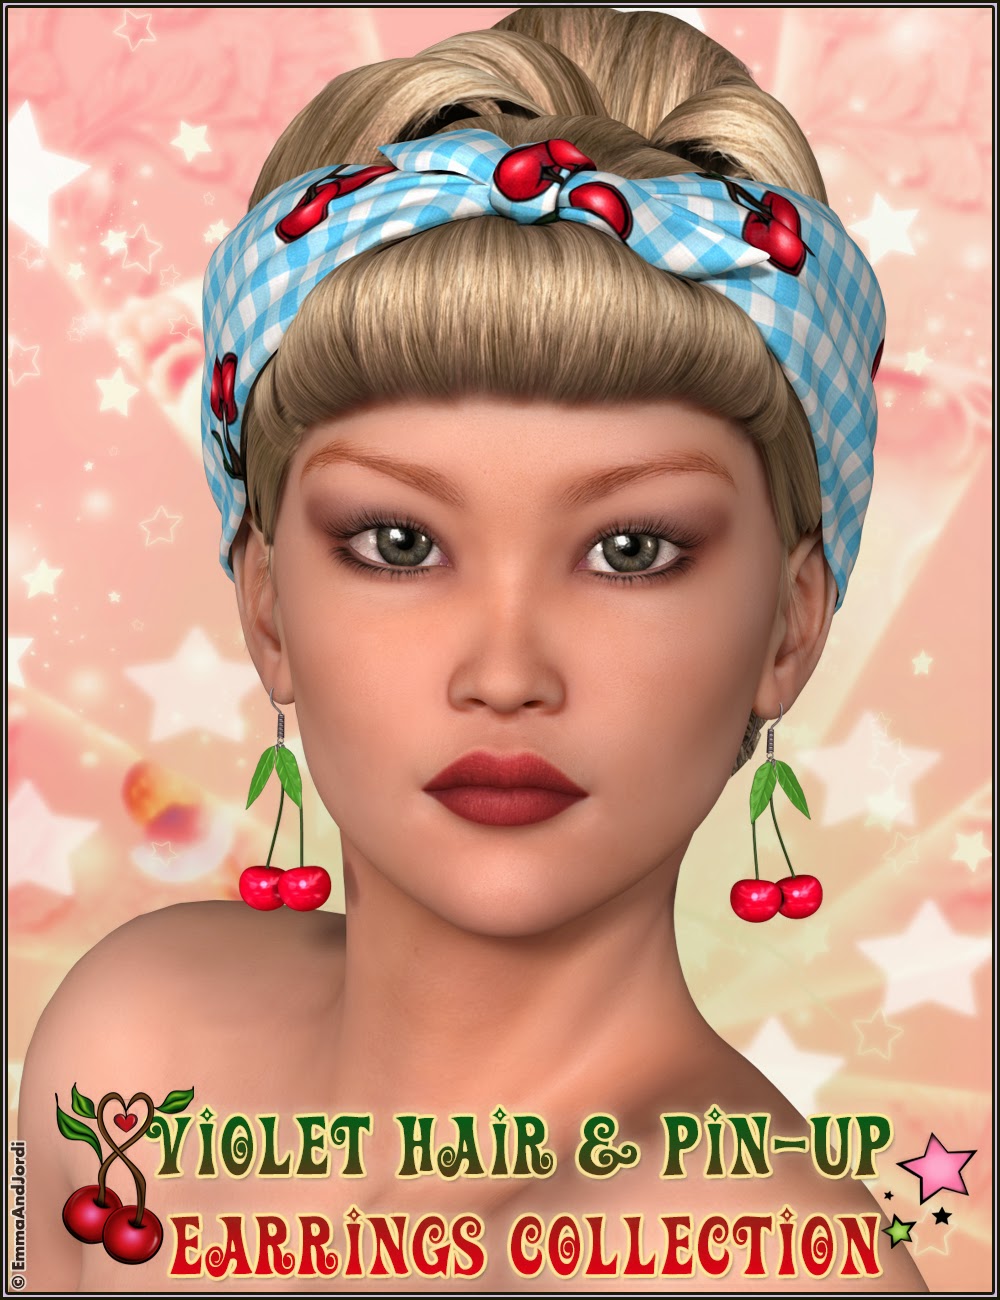 http://www.daz3d.com/violet-hair-and-pin-up-earrings-collection